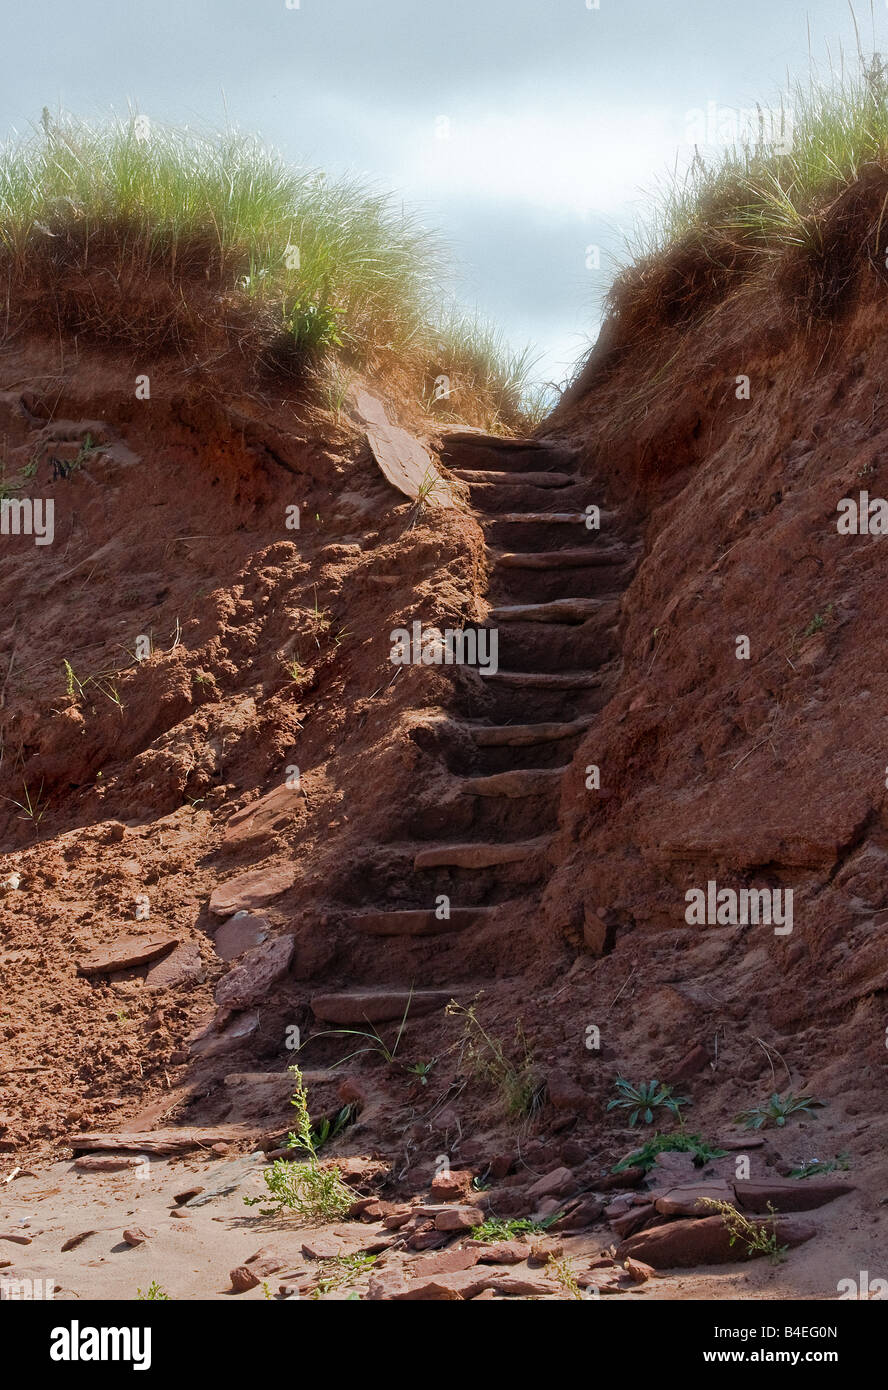 Twelve stone steps made of sand and stone. Stock Photo